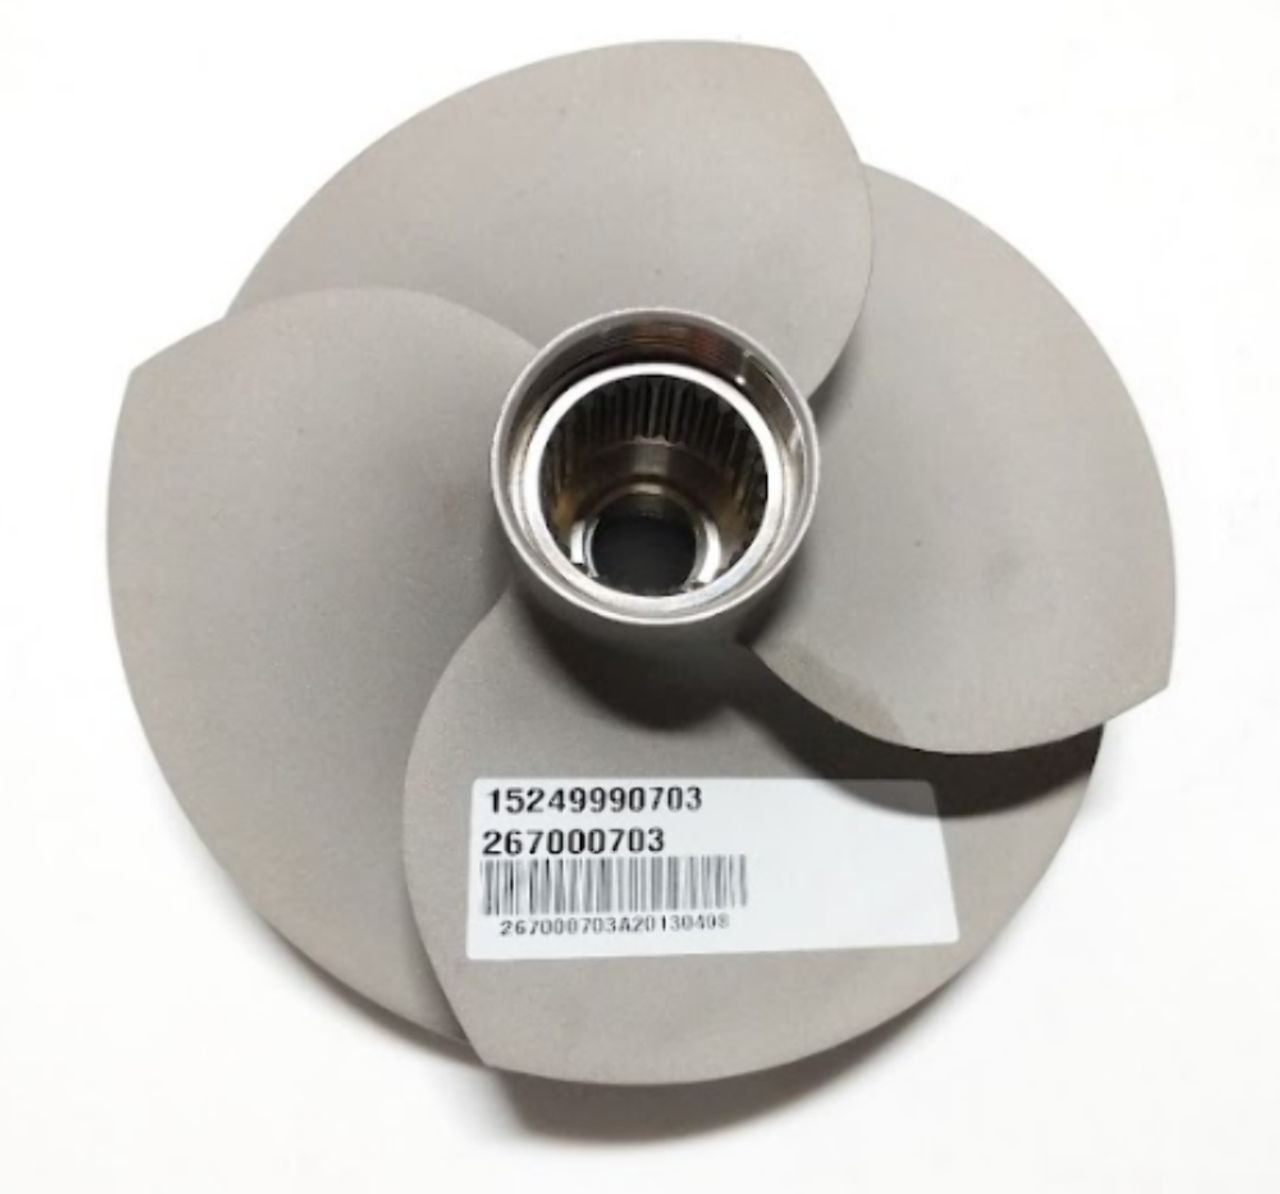 CAN-AM - RXT 215'09 OEM - STAINLESS STEEL IMPELLER - 267000703